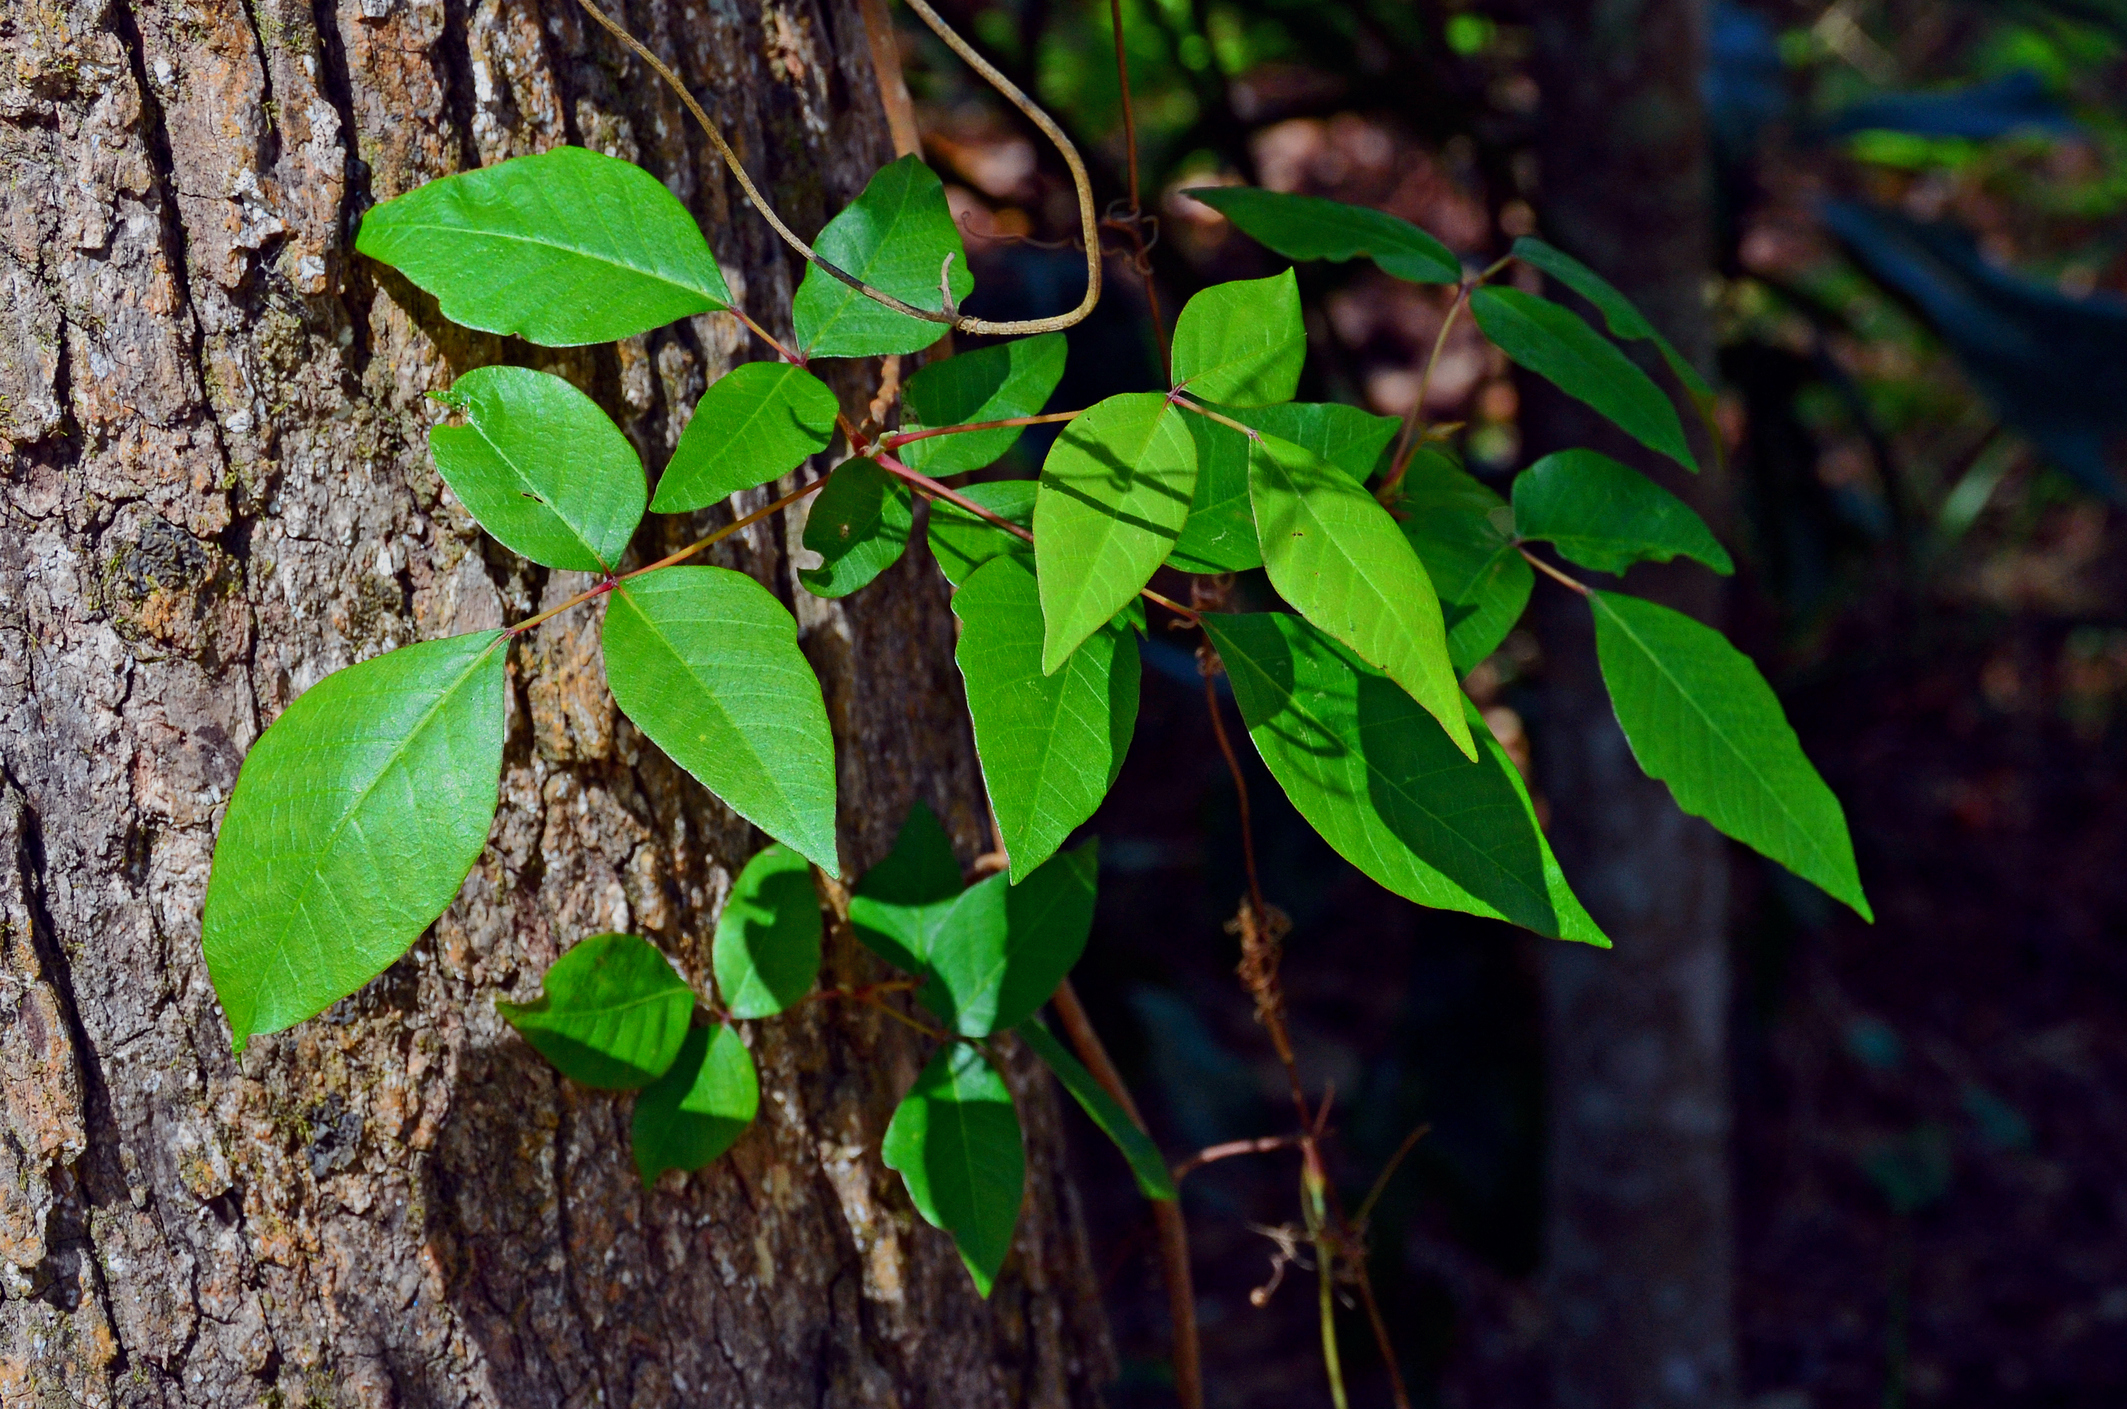 How To Identify Poison Ivy Once and for All - The Manual